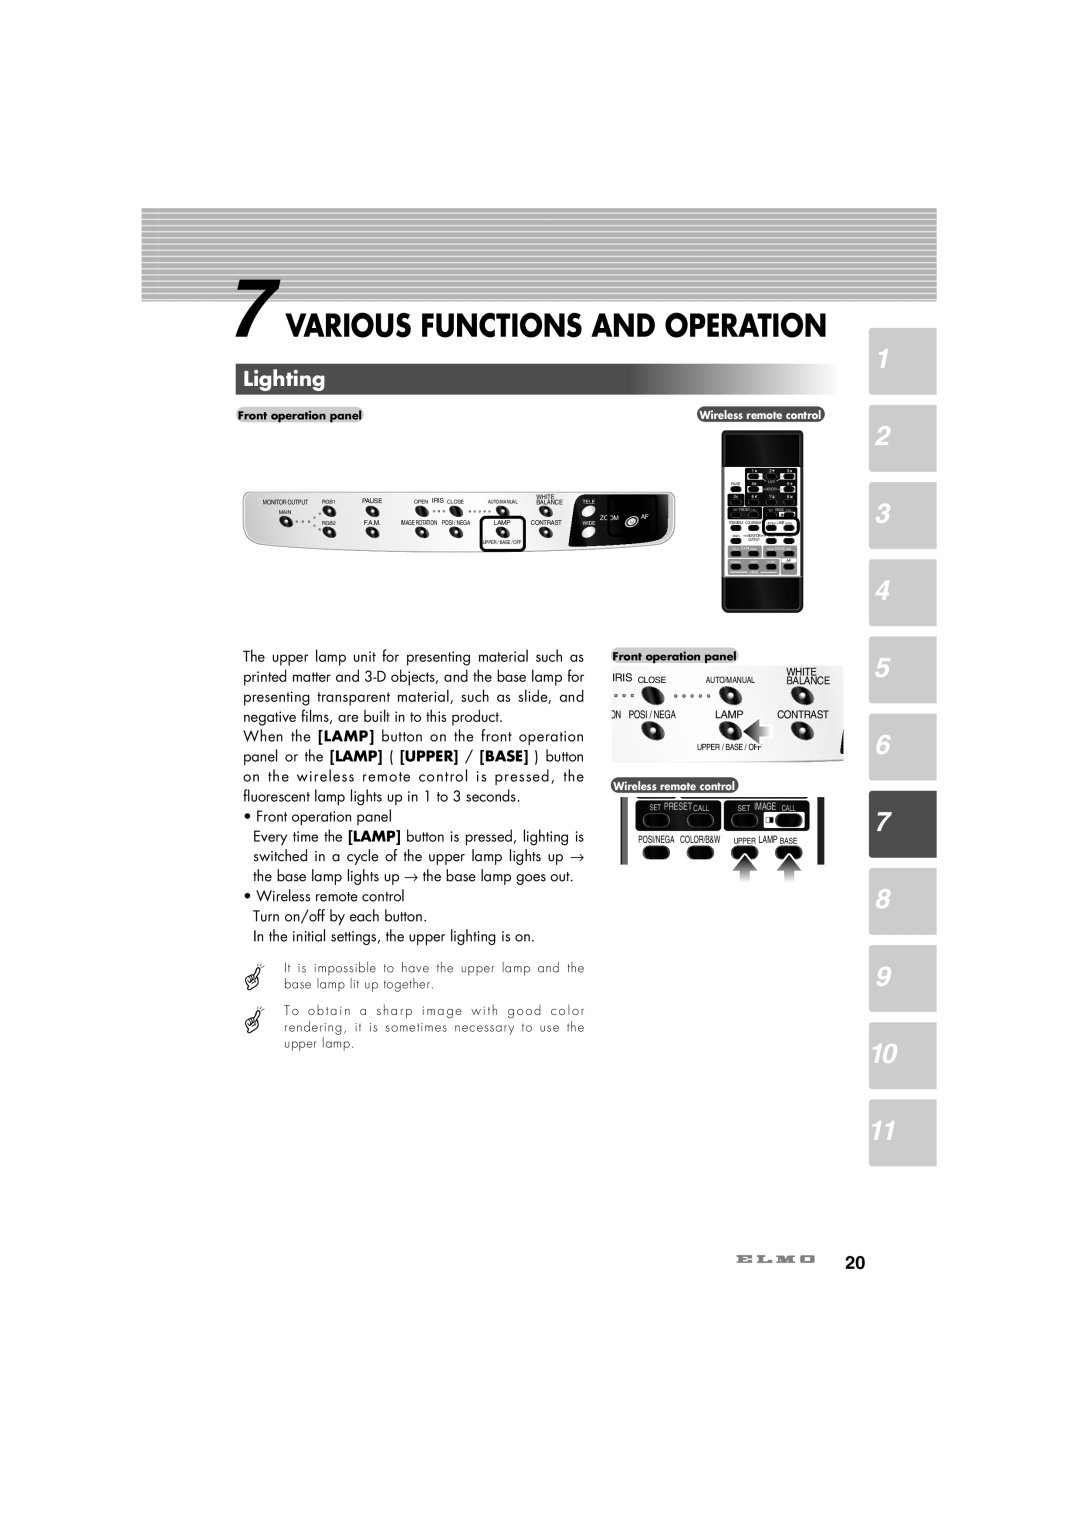 Elmo HV-7100SX instruction manual Lighting, Various Functions And Operation 